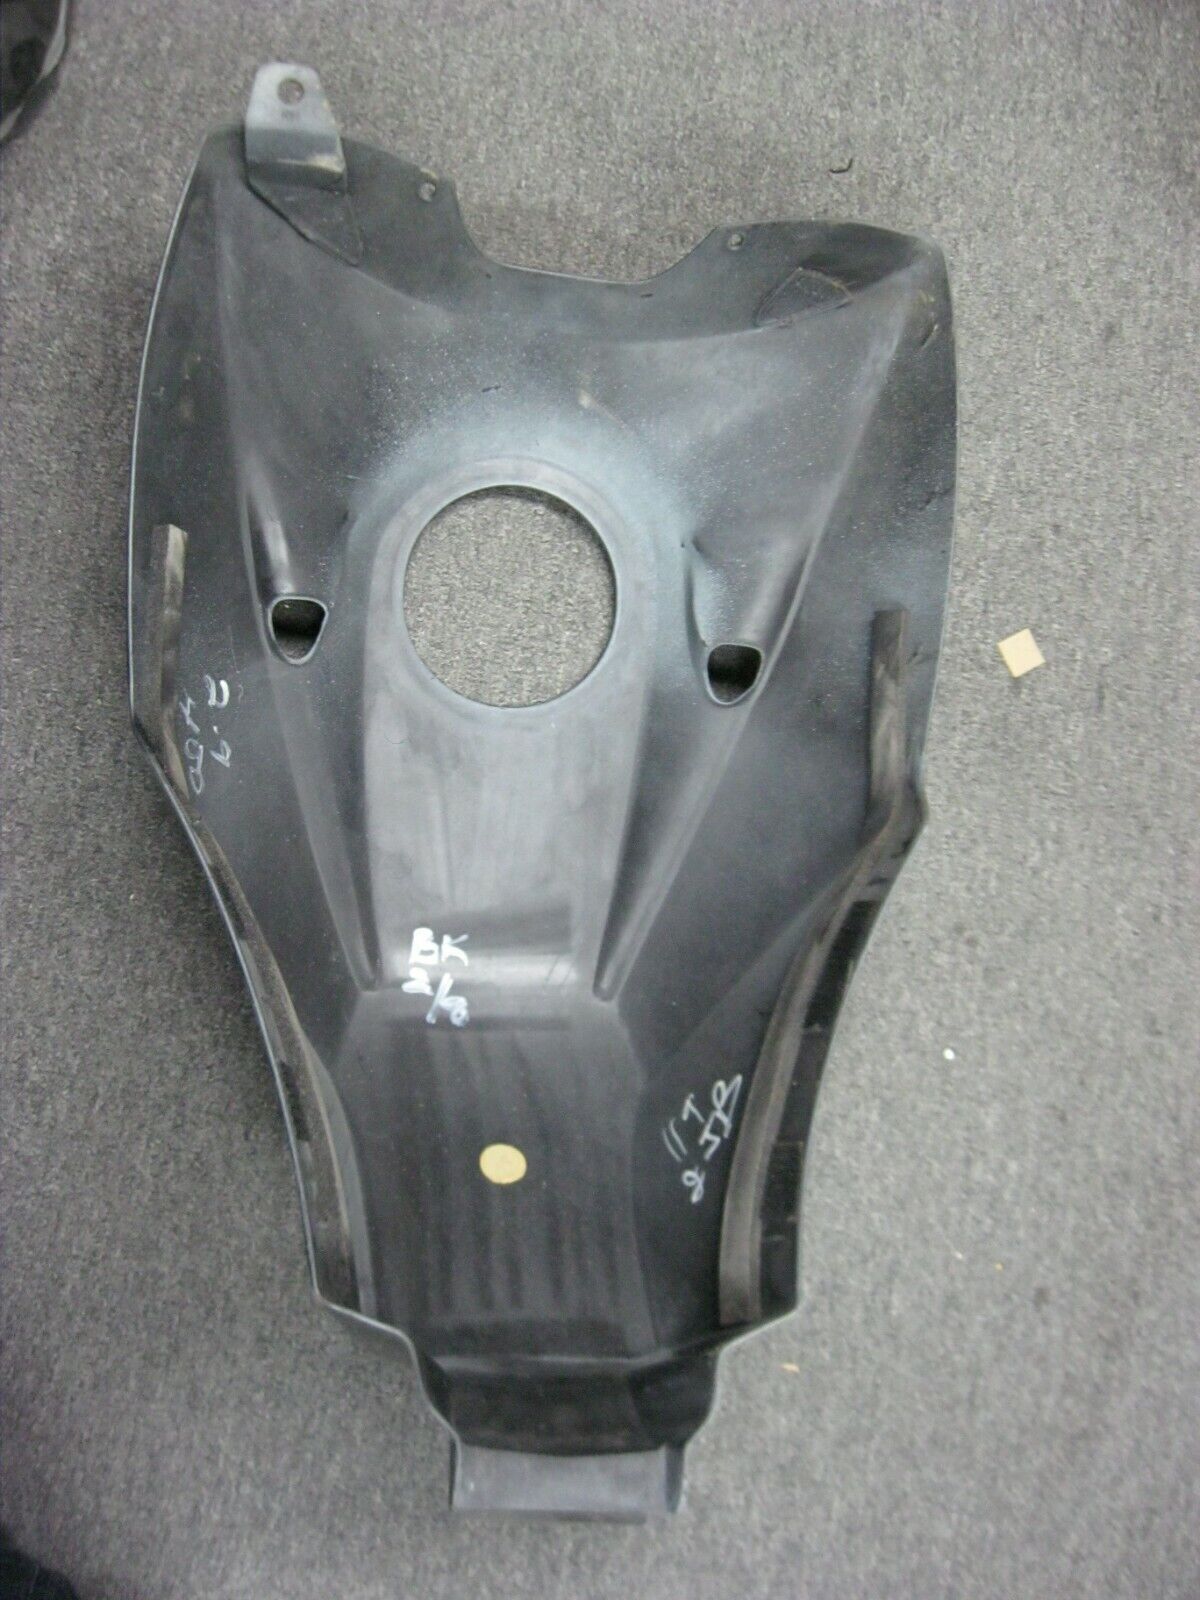 99-02 Buell Lightning X1 Fuel Tank Cover c/w Air Inlet Holes / Damaged  (X1-3)